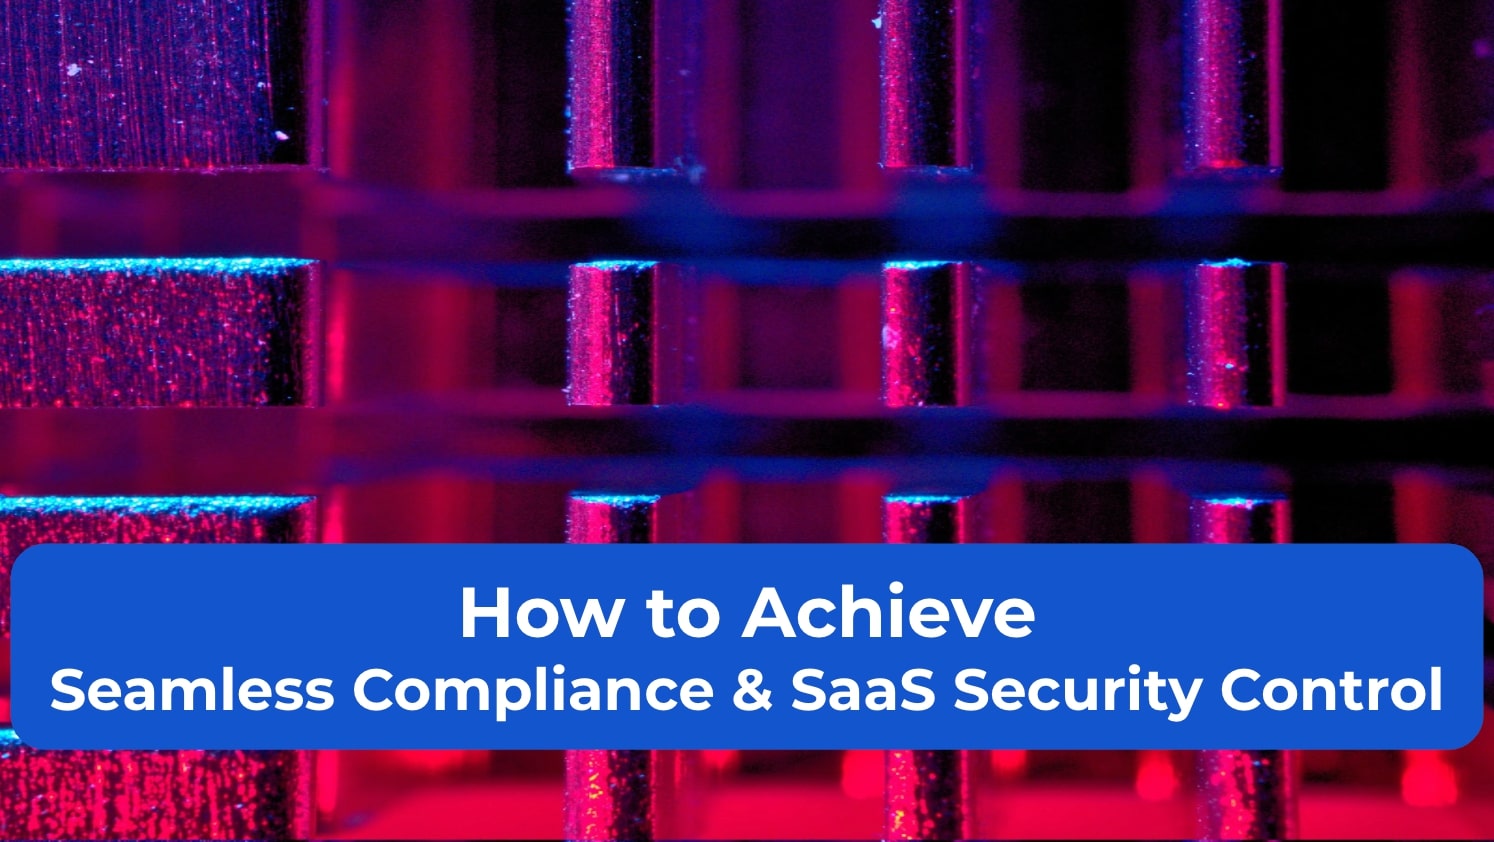 How to Achieve Seamless Compliance & SaaS Security Control